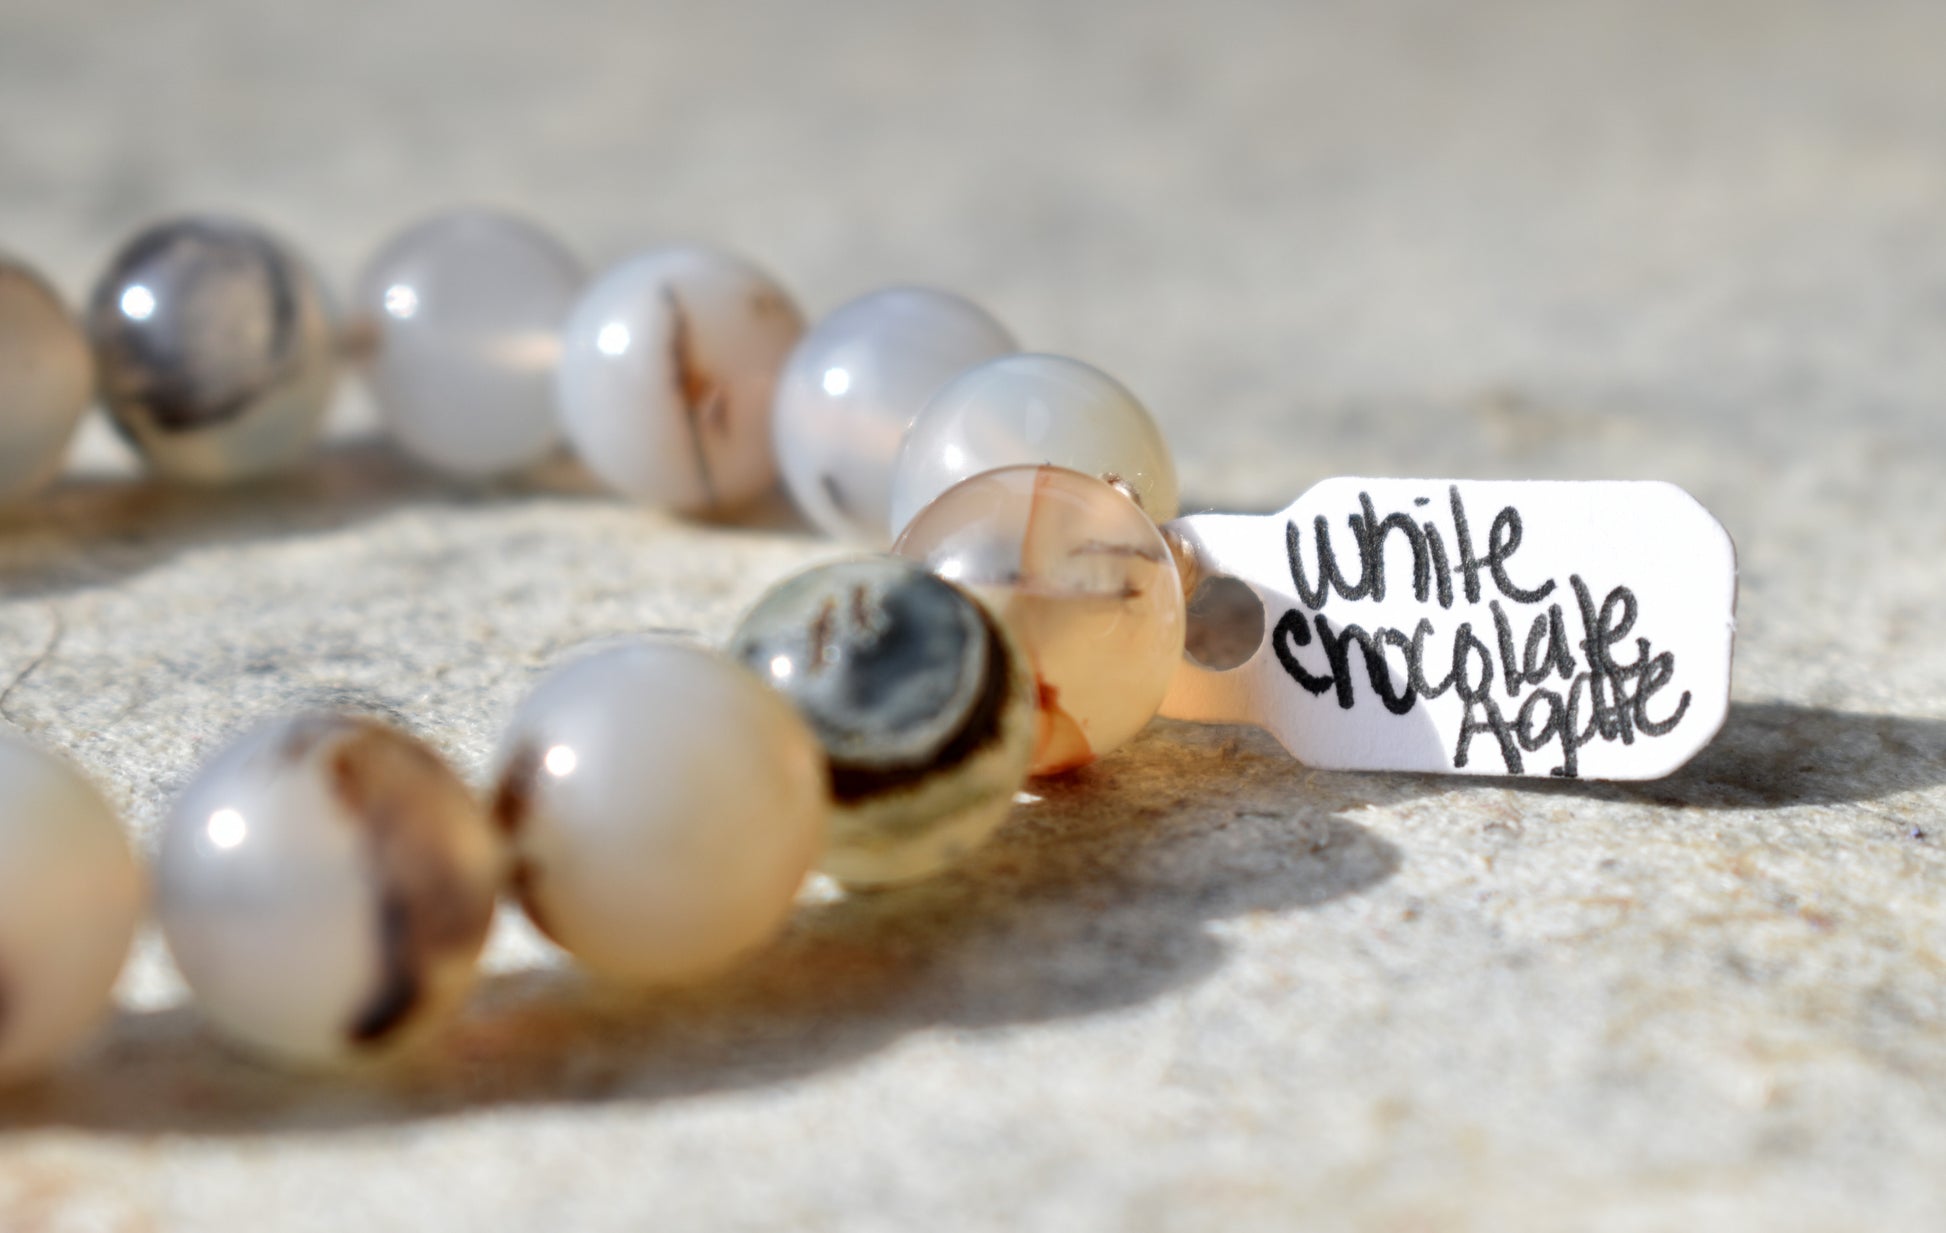 stones-of-transformation - White Chocolate Agate Bracelet - Stones of Transformation - 